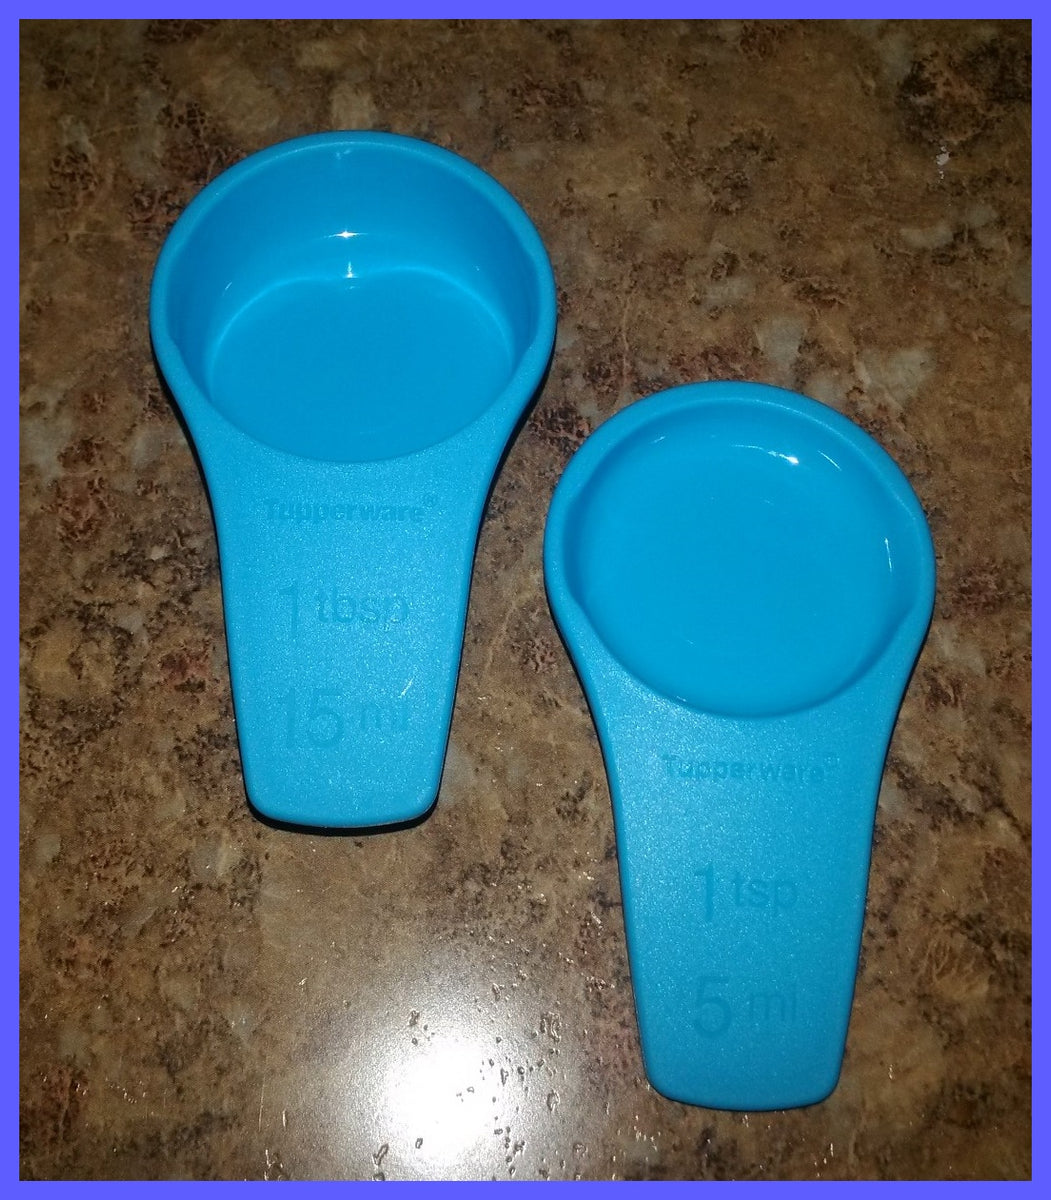 Tupperware Novelty Size Collectible Keychain Blue Measuring Cup